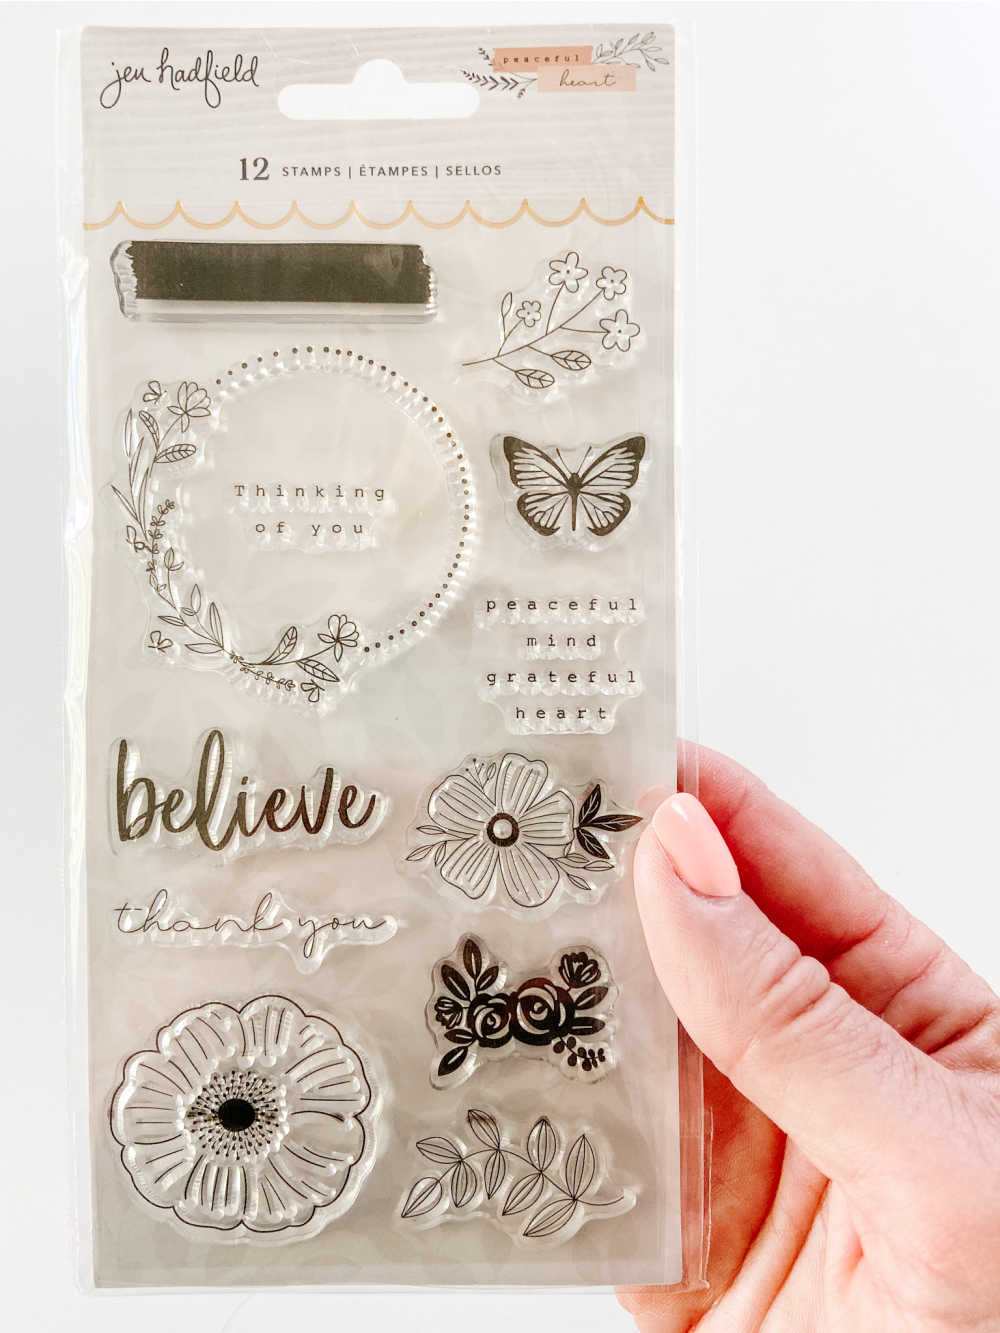 New Jen Hadfield Peaceful Heart Line! My new Pebbles paper and embellishment line with a cozy boho feel is available now!